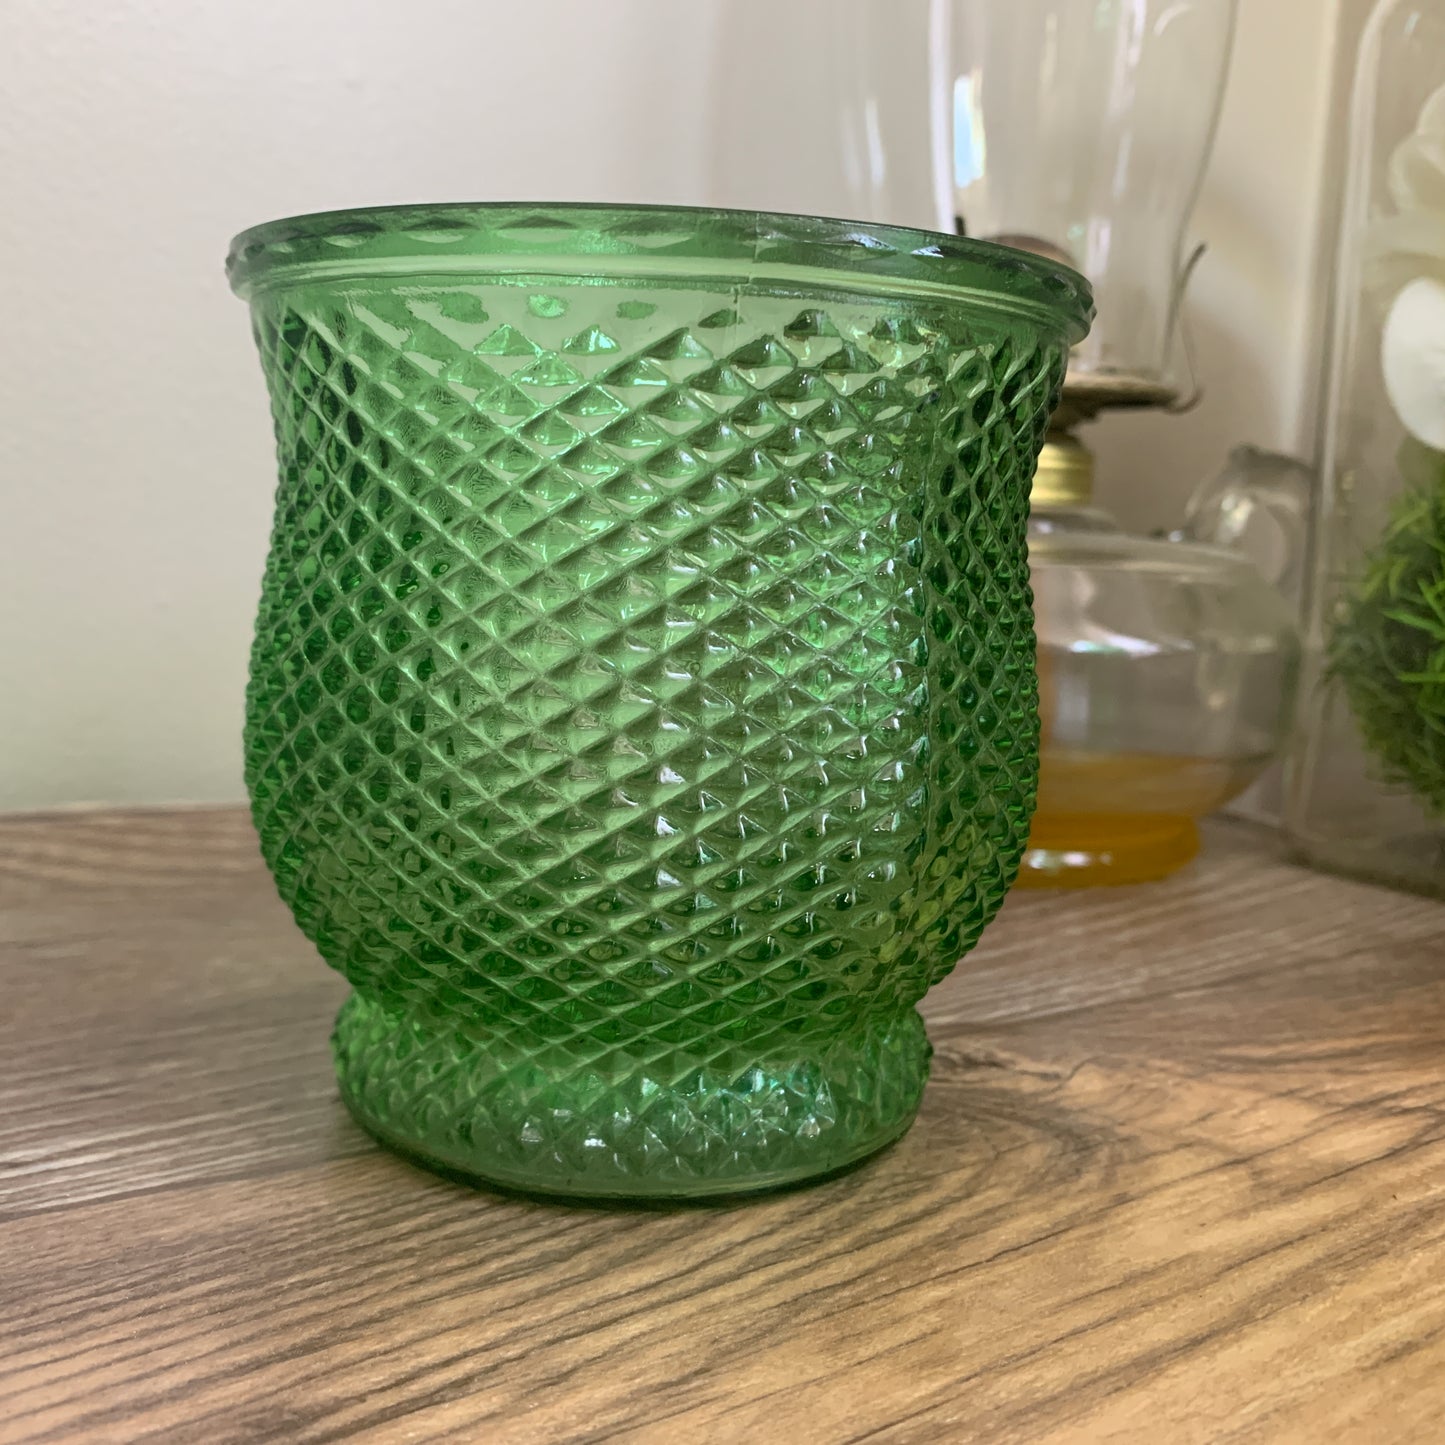 Small Green Vase with Diamond Pattern, Vintage Green Glass E O Brody Vase